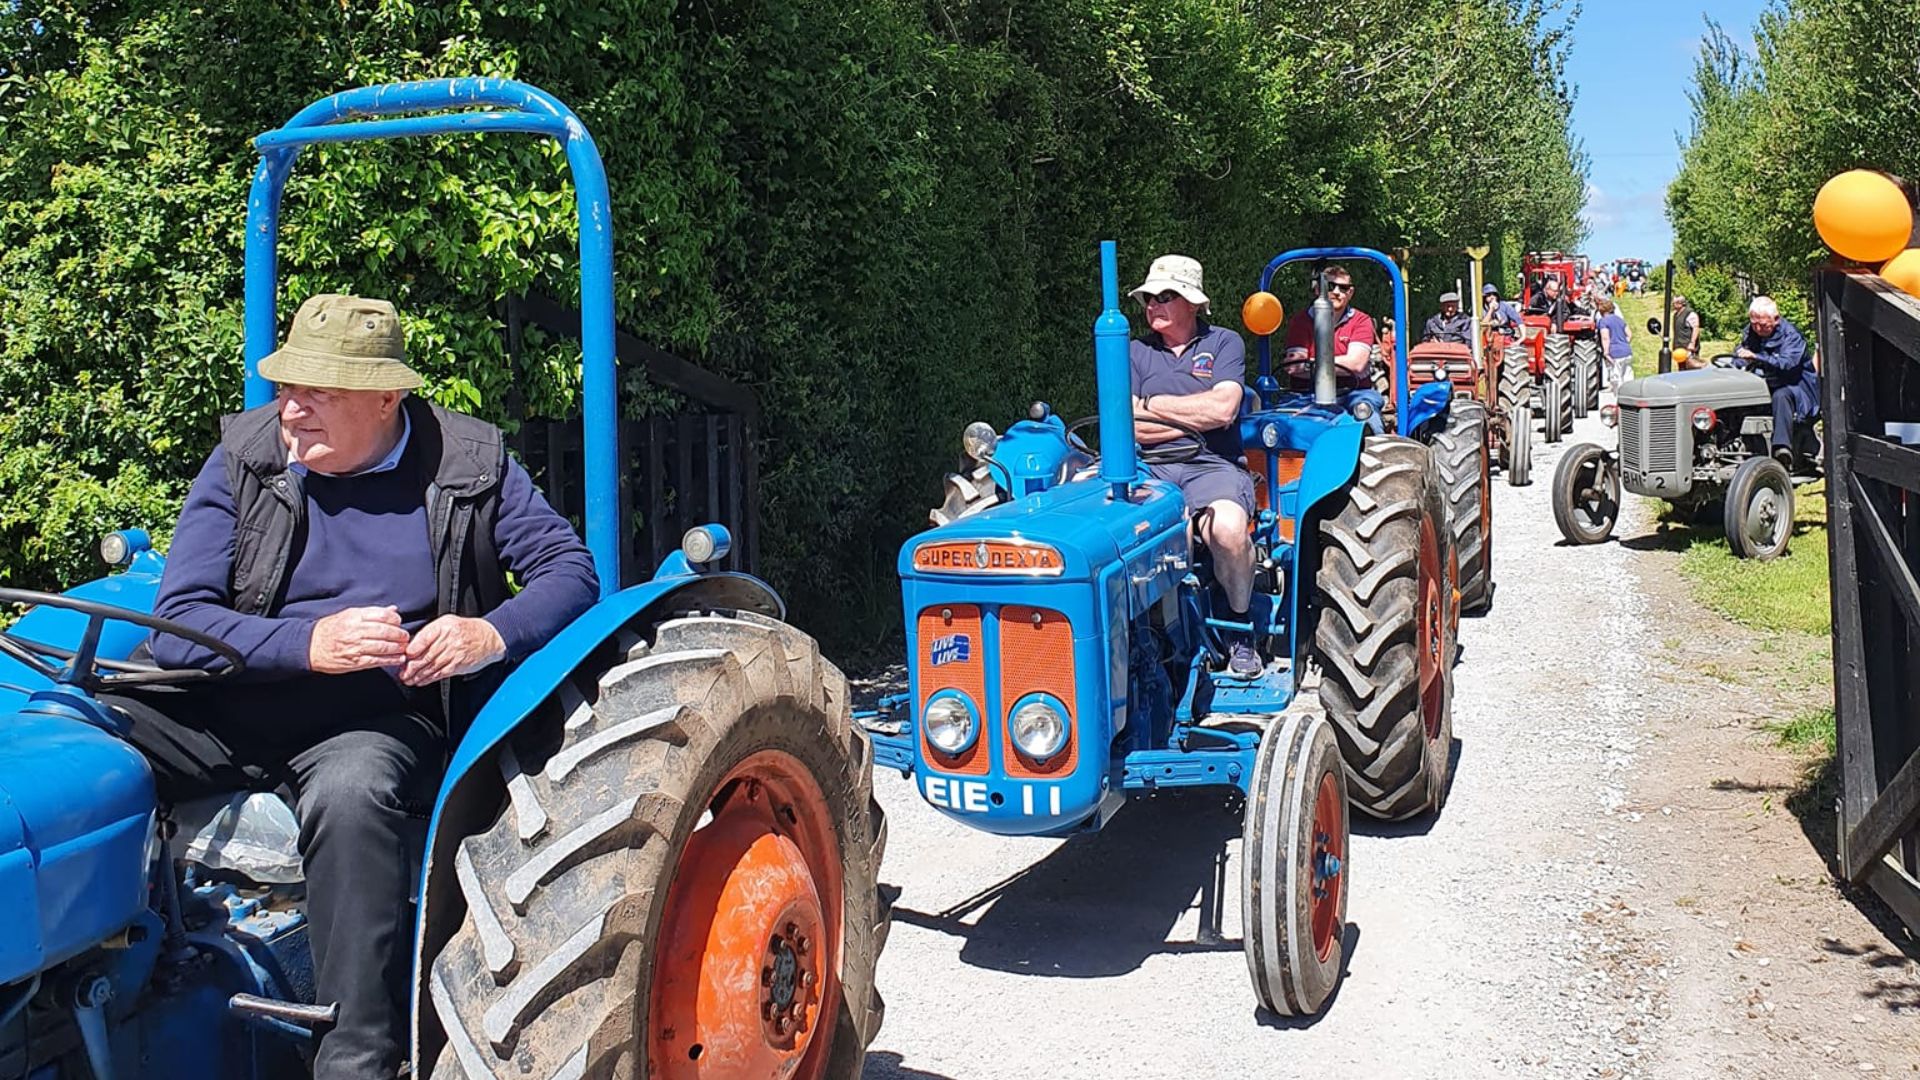 Croom Tractor Run 2022 took place on Sunday, May 29 in aid of two charities the Jack and Jill Children’s Foundation and the Milford Hospice